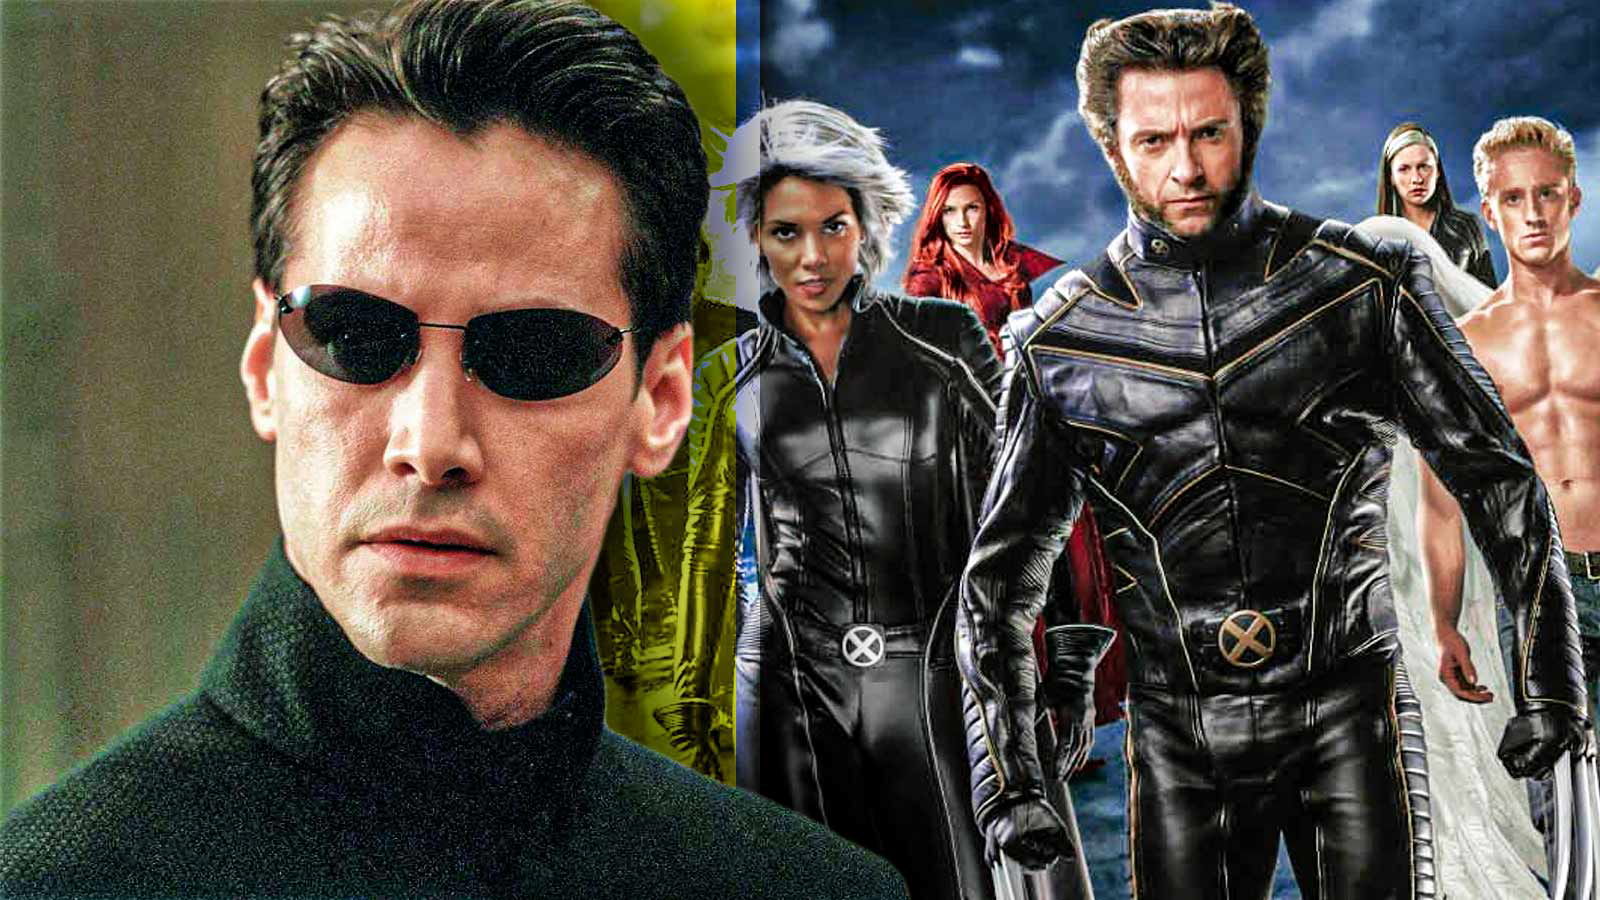 Mind-blowing Reason Why X-Men Wore the Hated Black Leather Suits in the Original Trilogy is Connected to Keanu Reeves’ $467 Million Blockbuster